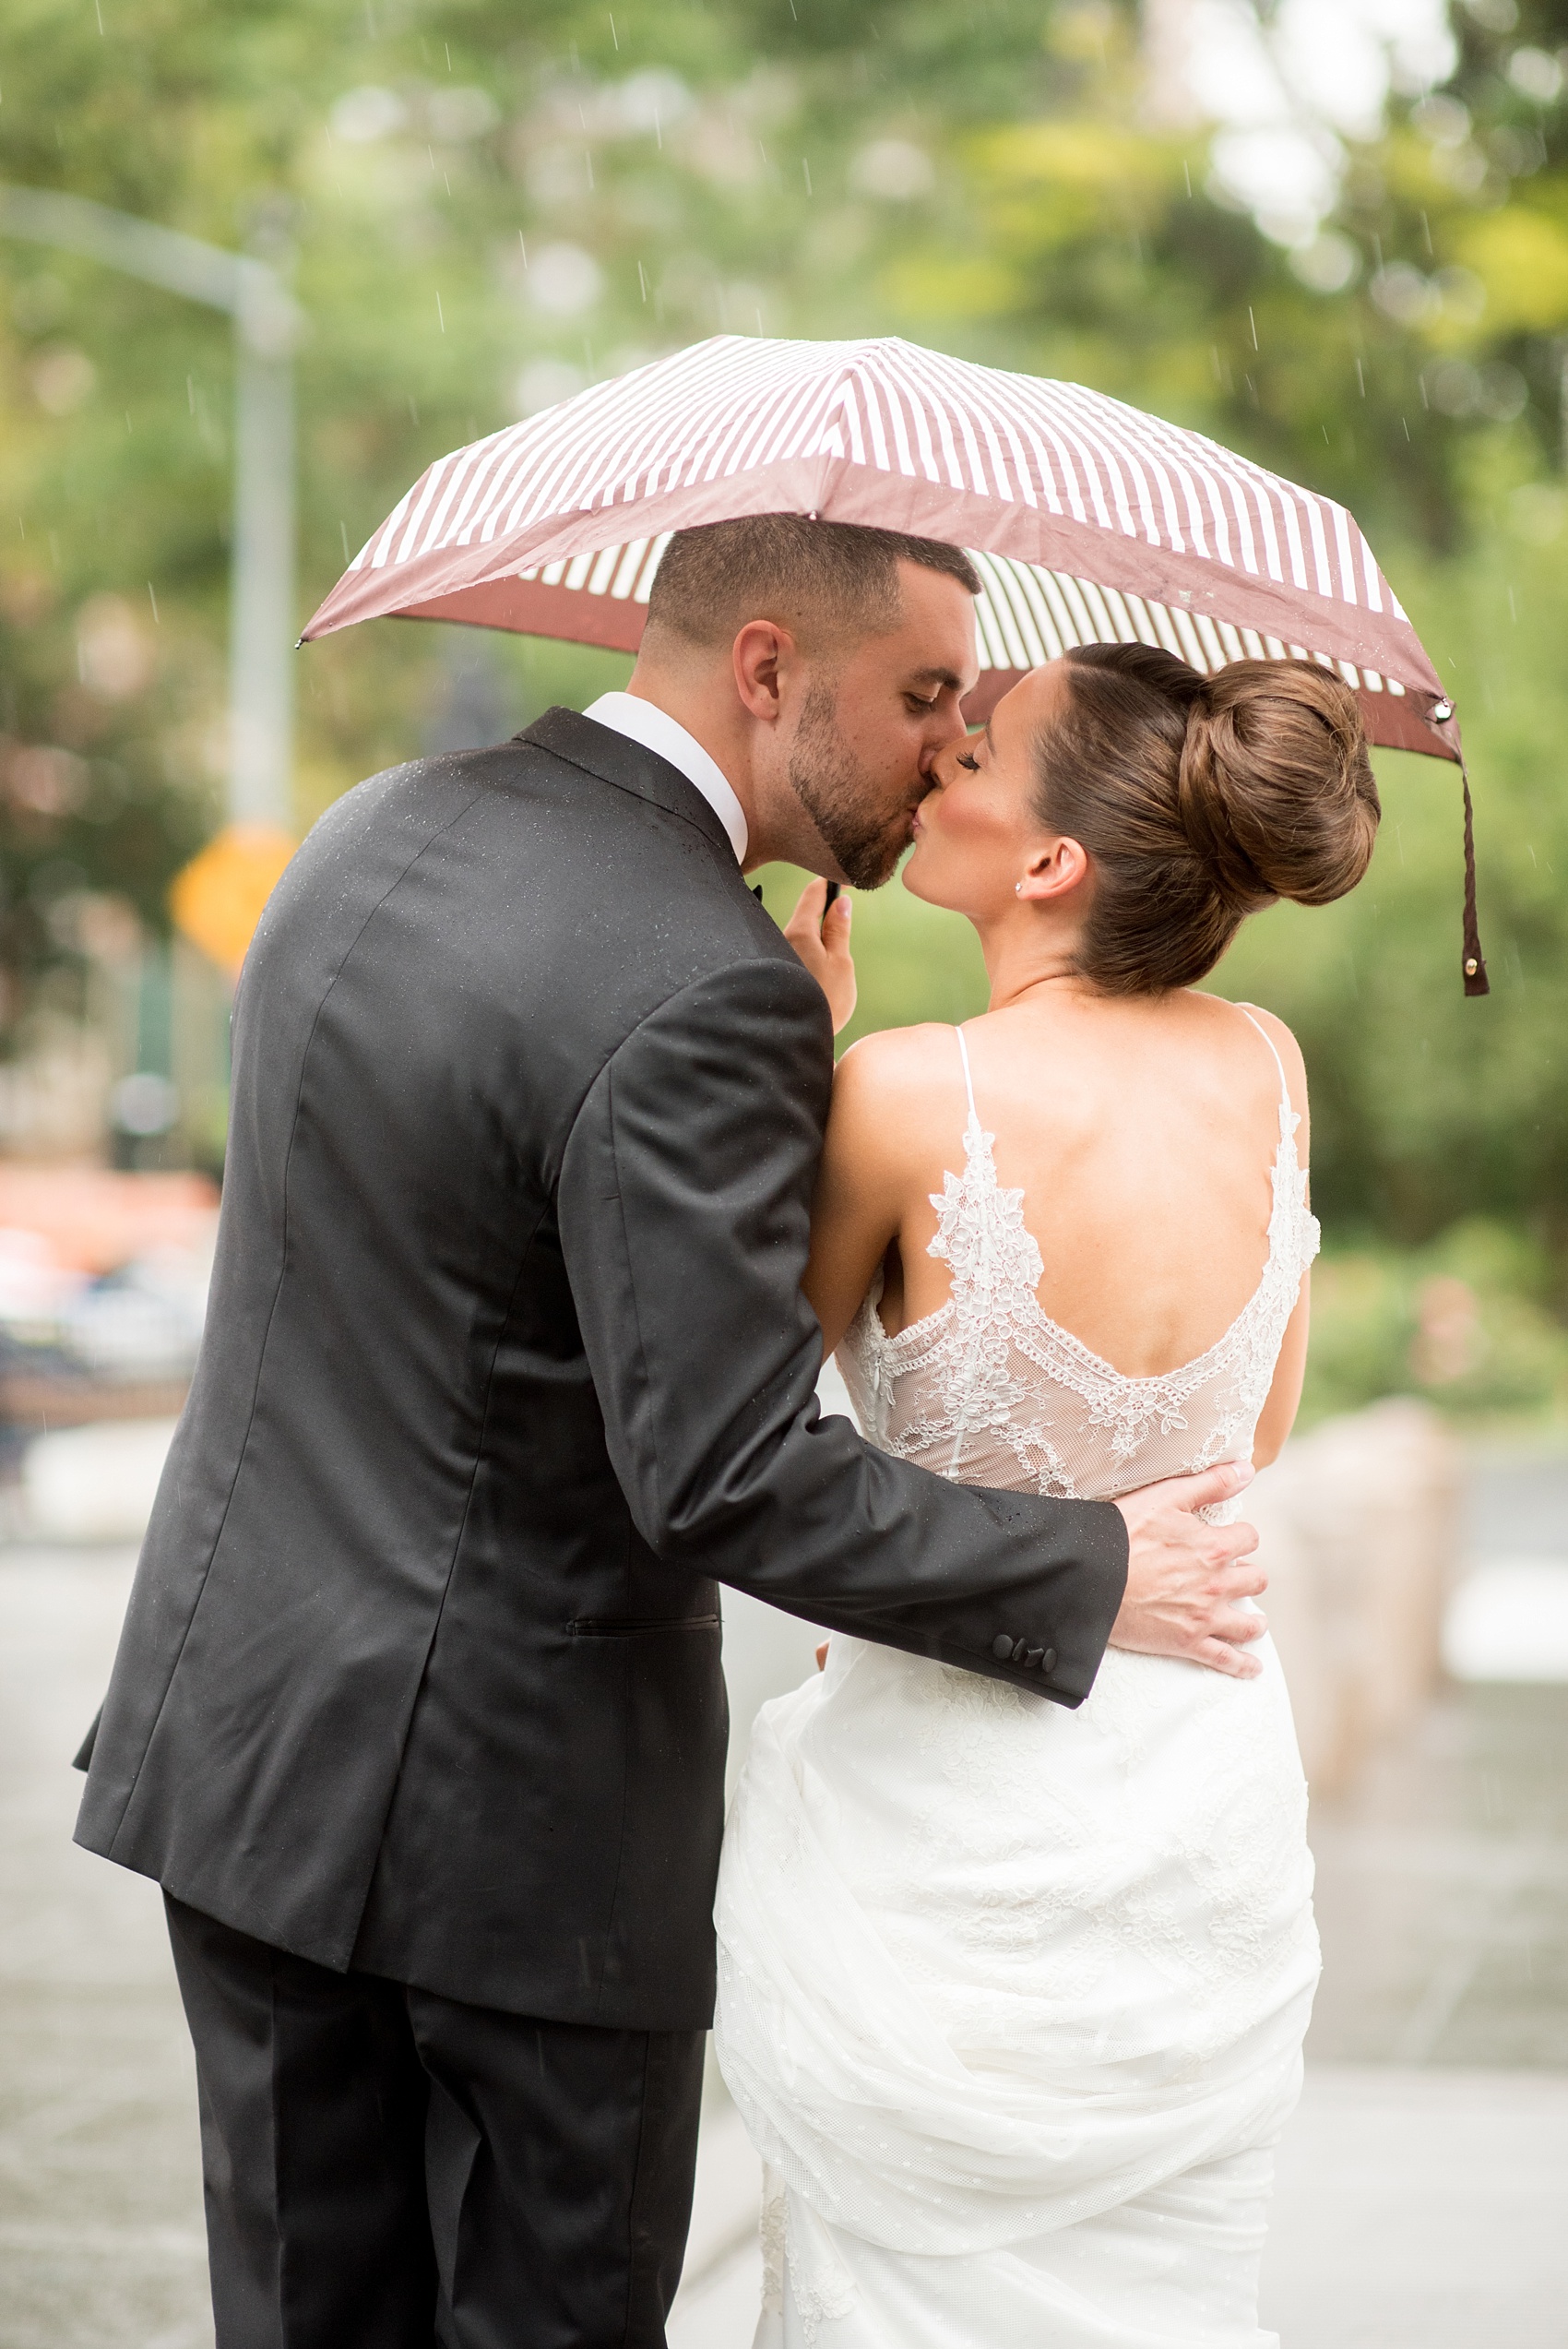 Mikkel Paige Photography photos of a luxury wedding in NYC. First look in Washington Square Park with a picture of the bride and groom under an umbrella kissing in the rain.